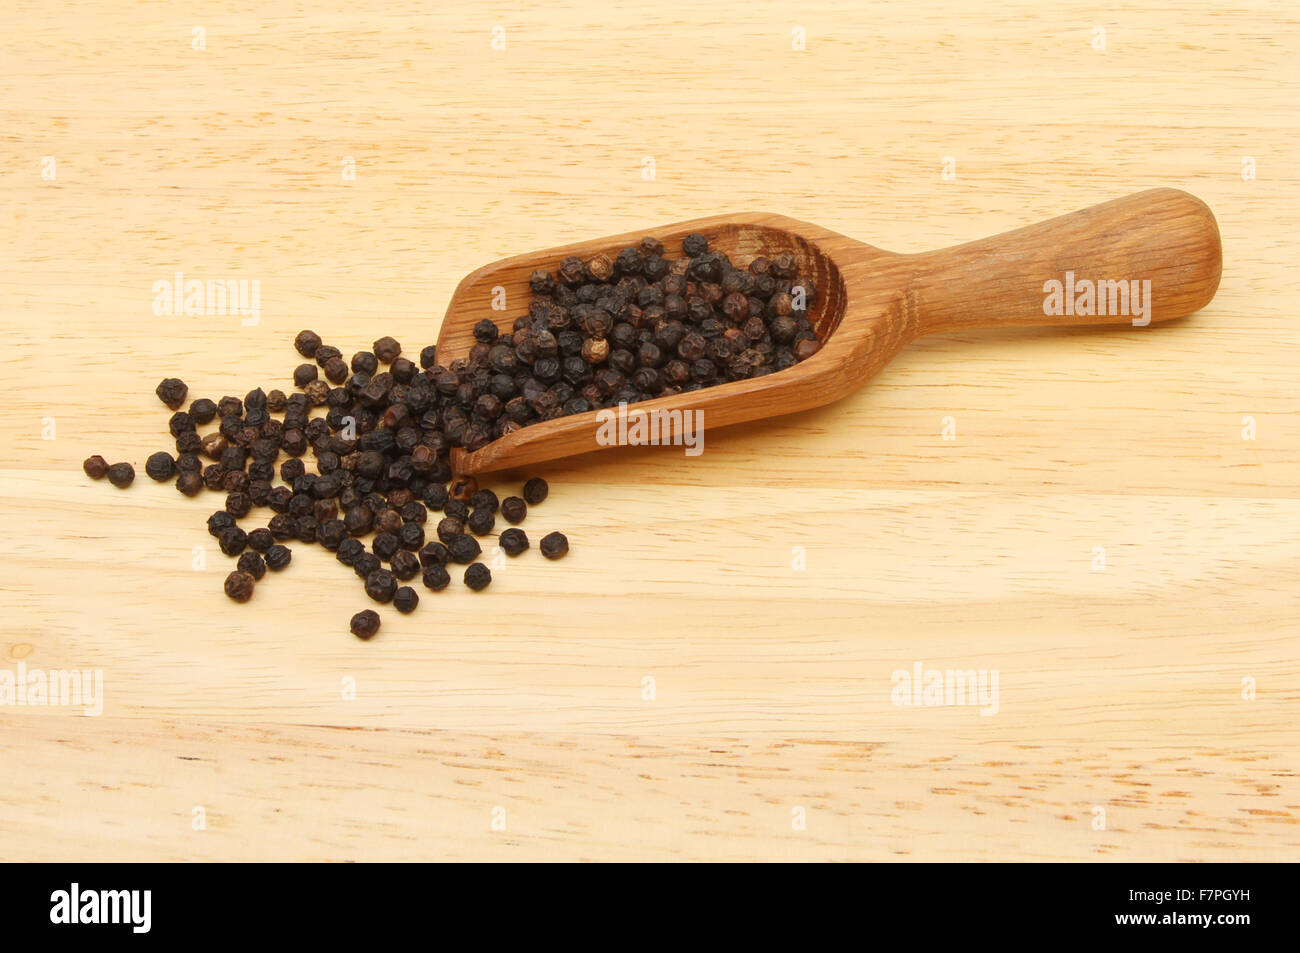 Black peppercorns in a wooden scoop on a board Stock Photo